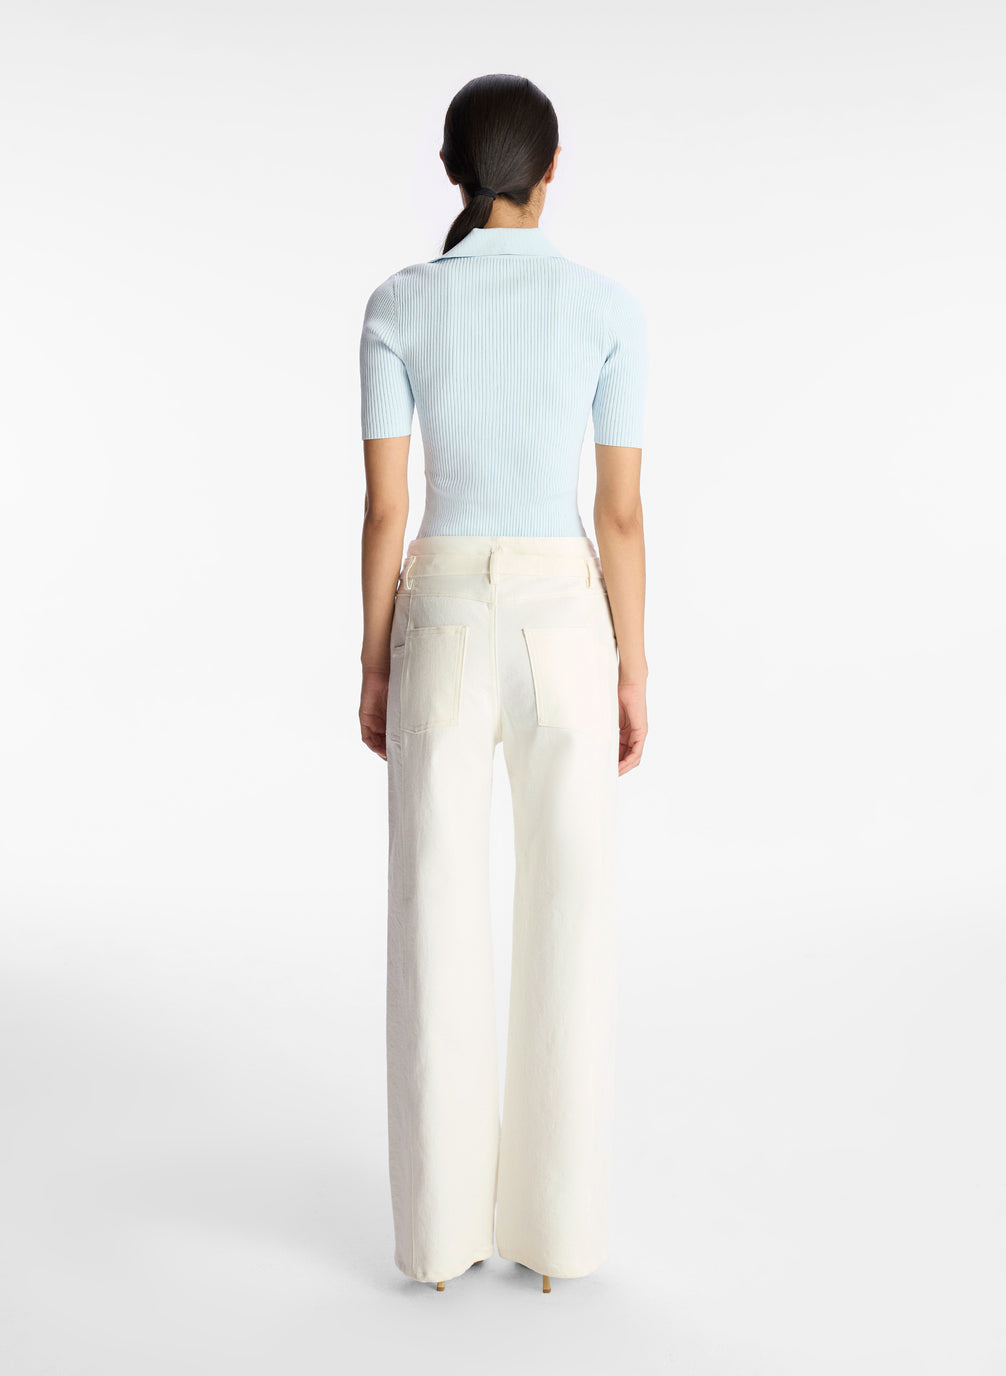 back view of woman wearing light blue collared shirt and white wide leg jeans